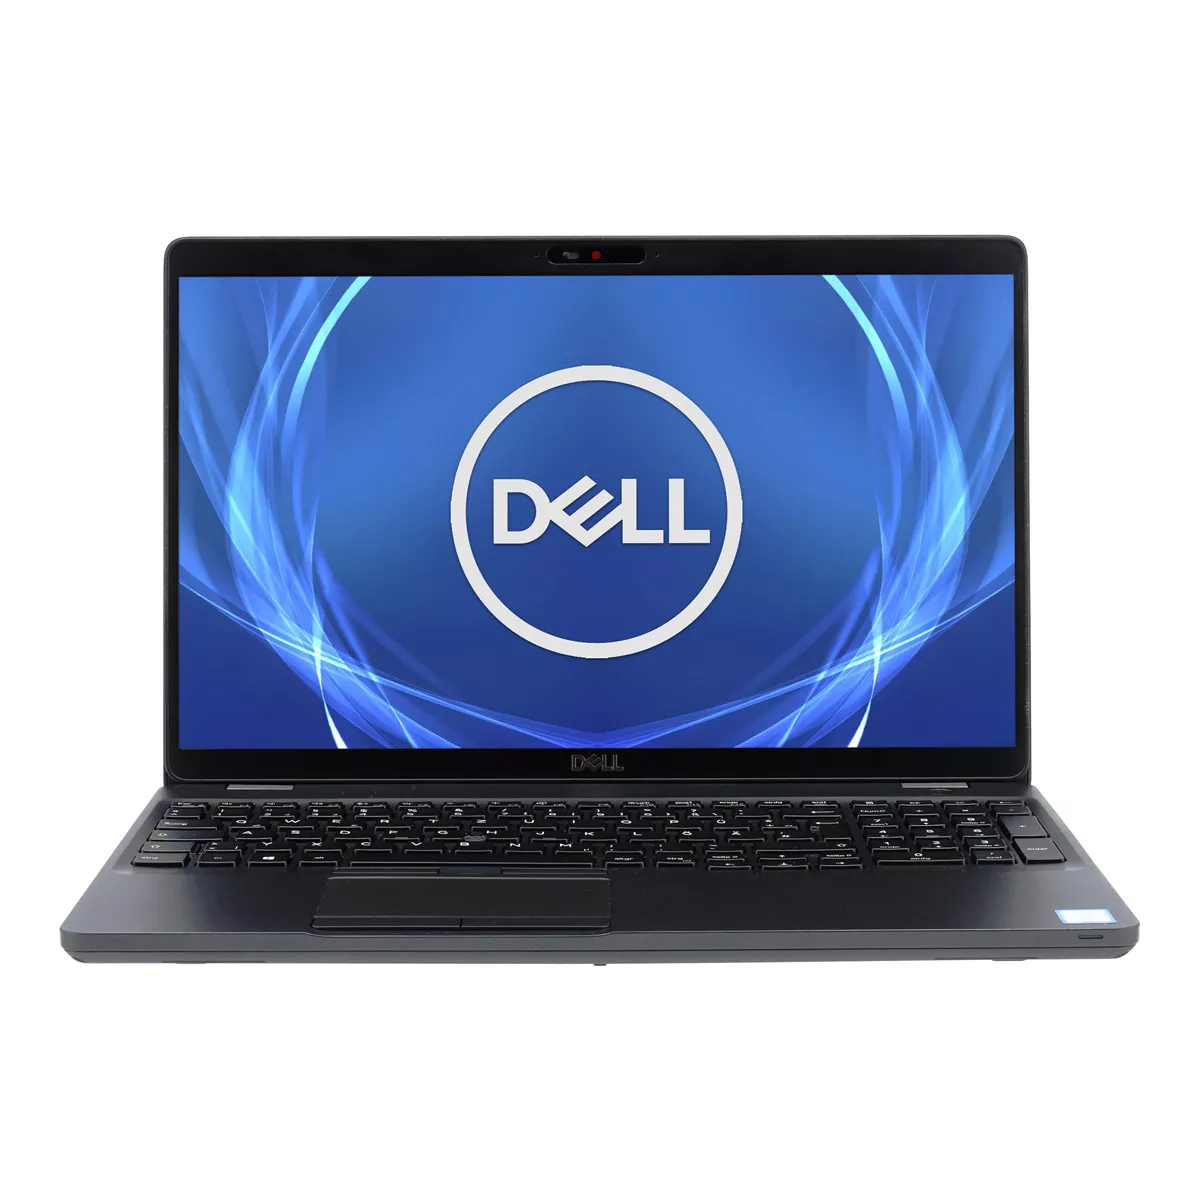 Dell Latitude 5501 Core i7 9850H nVidia GeForce MX150 32 GB 1 TB M.2 nVME SSD Webcam Touch A